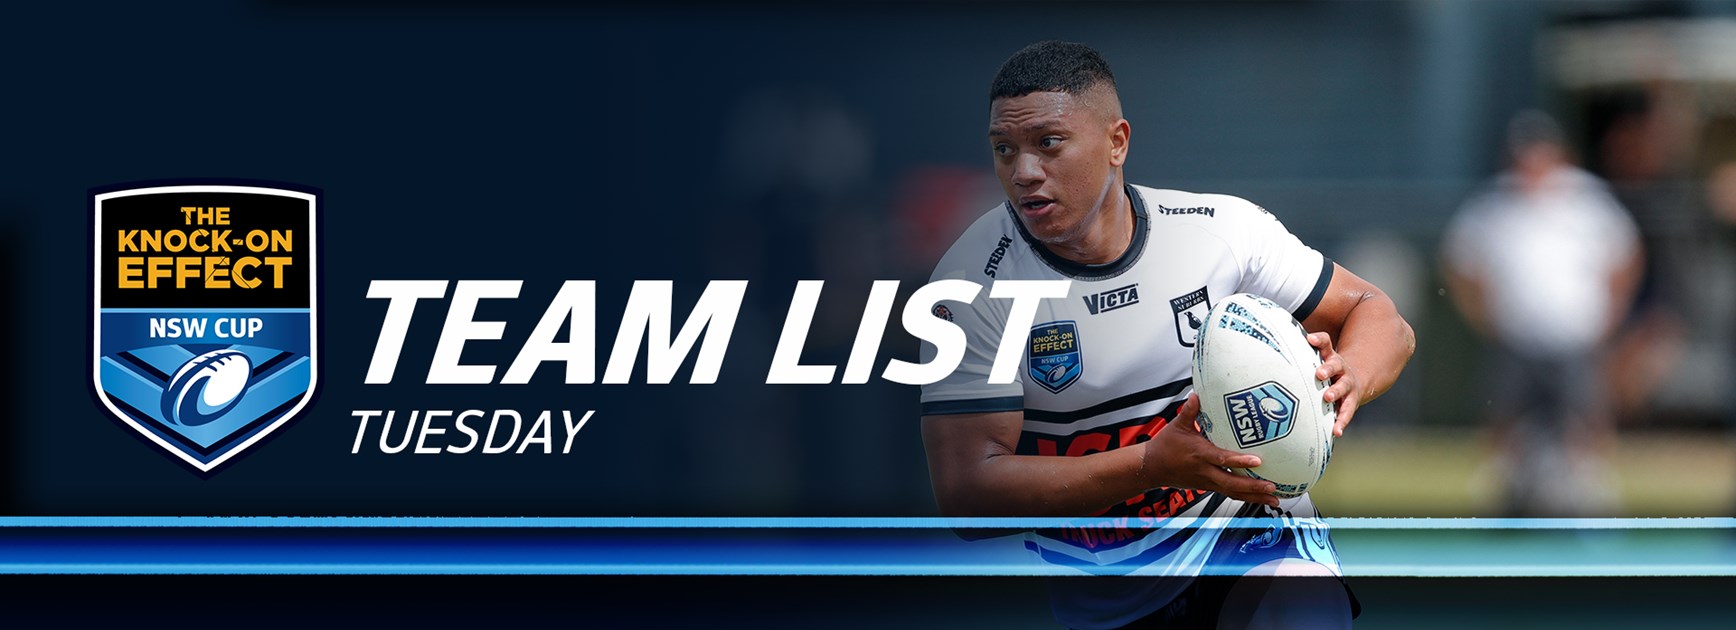 Team List Tuesday | The Knock-On Effect NSW Cup Round Five